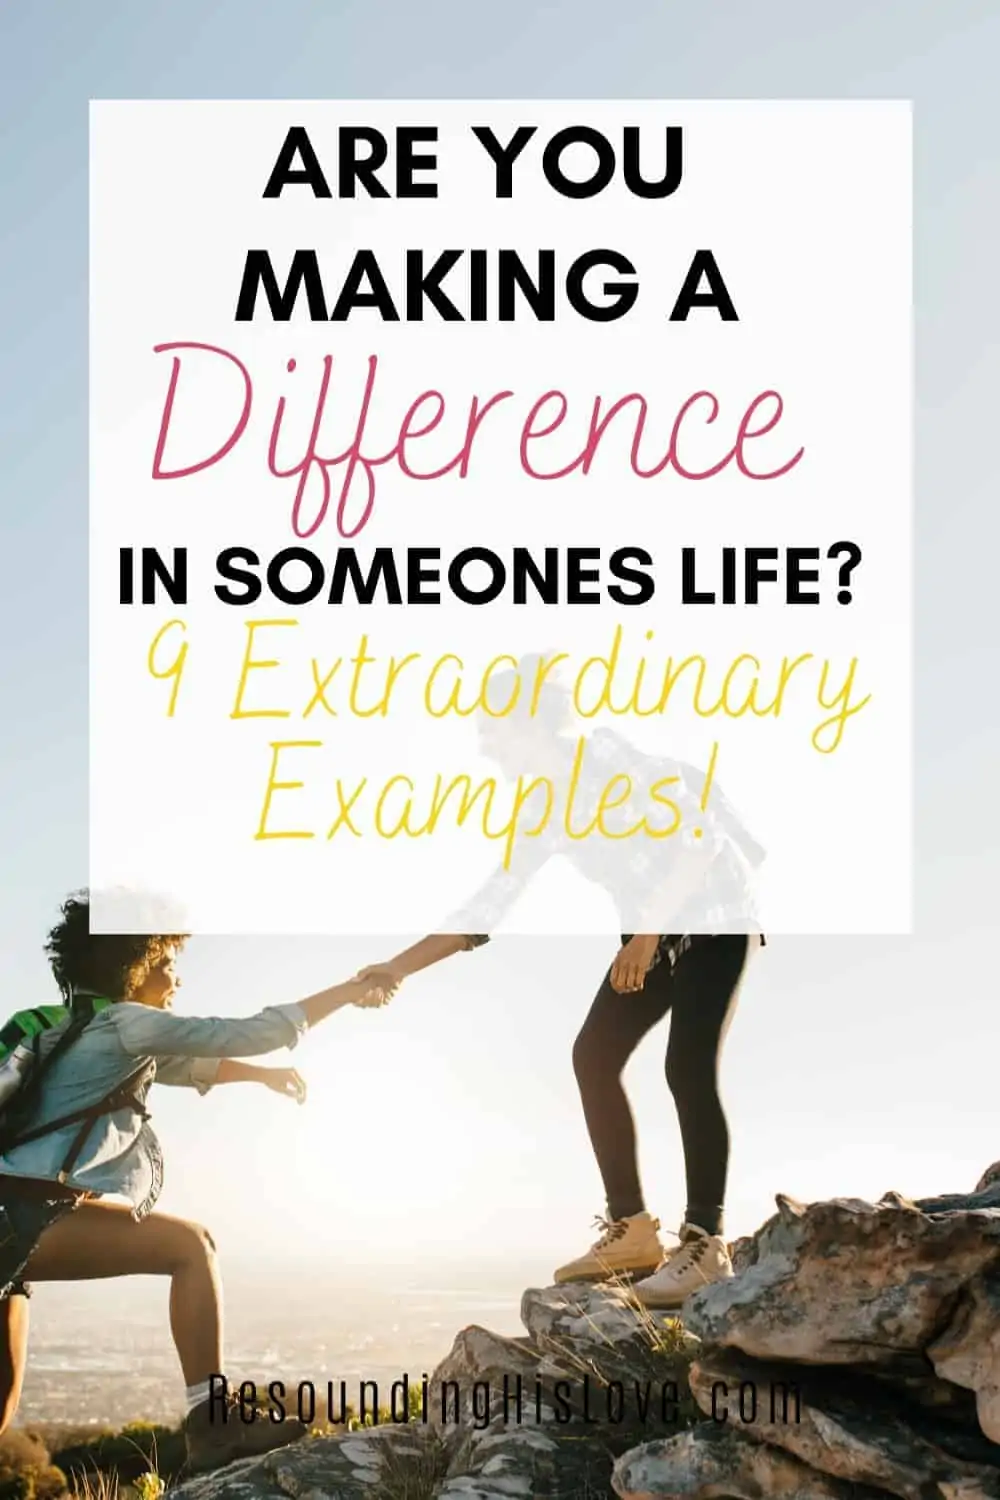 9 Extraordinary Examples of Making a Difference in Someone's Life